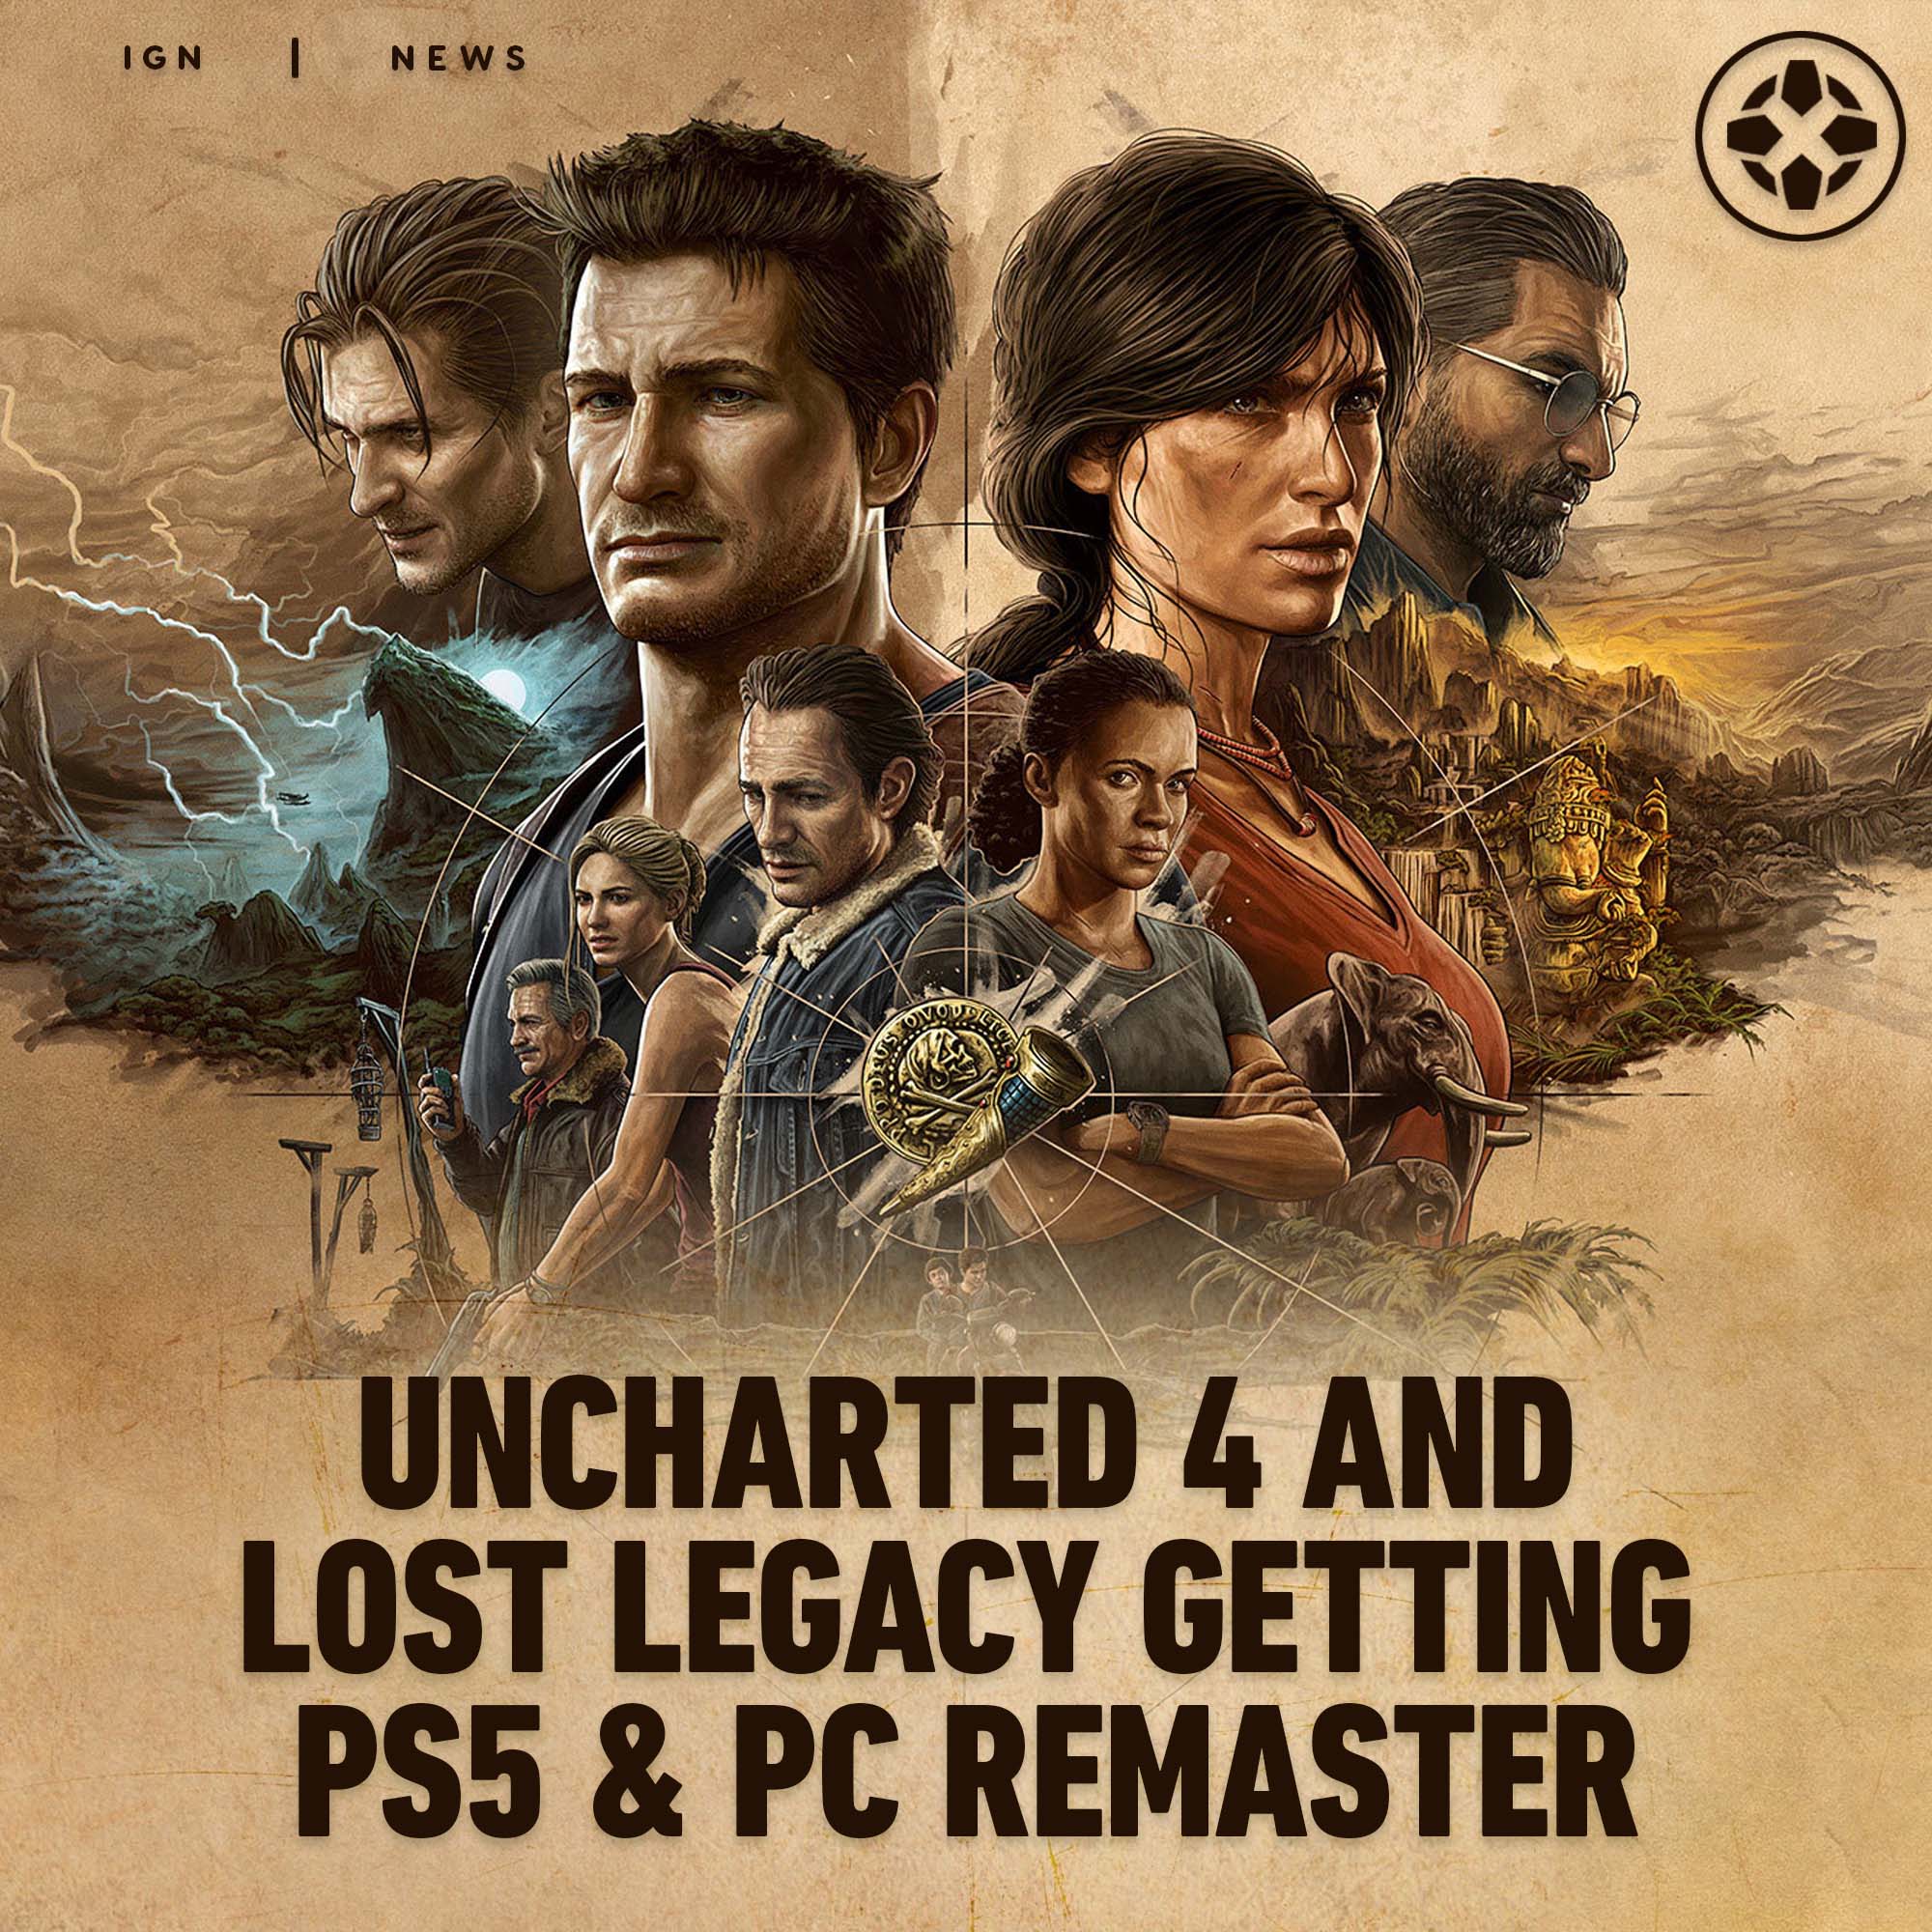 IGN on X: Naughty Dog announced Uncharted: Legacy of Thieves Collection,  which packages remastered versions of Uncharted 4: A Thief's End and  Uncharted: The Lost Legacy together for PS5 and PC.